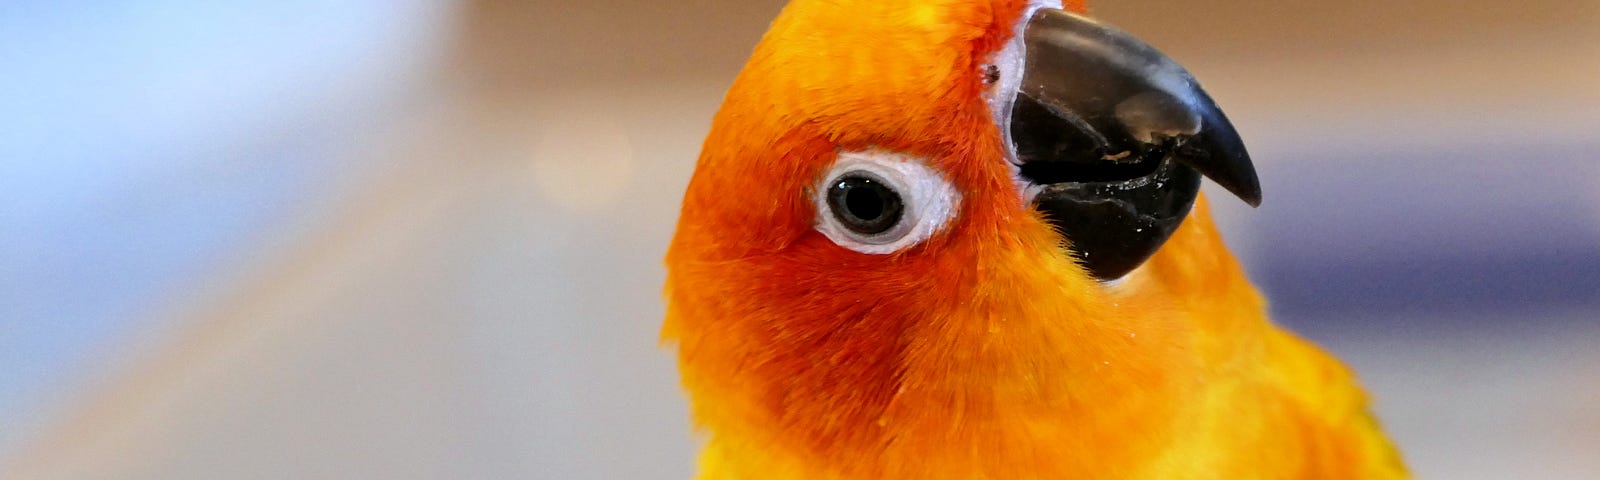 A parrot looked at you with thoughtful eyes